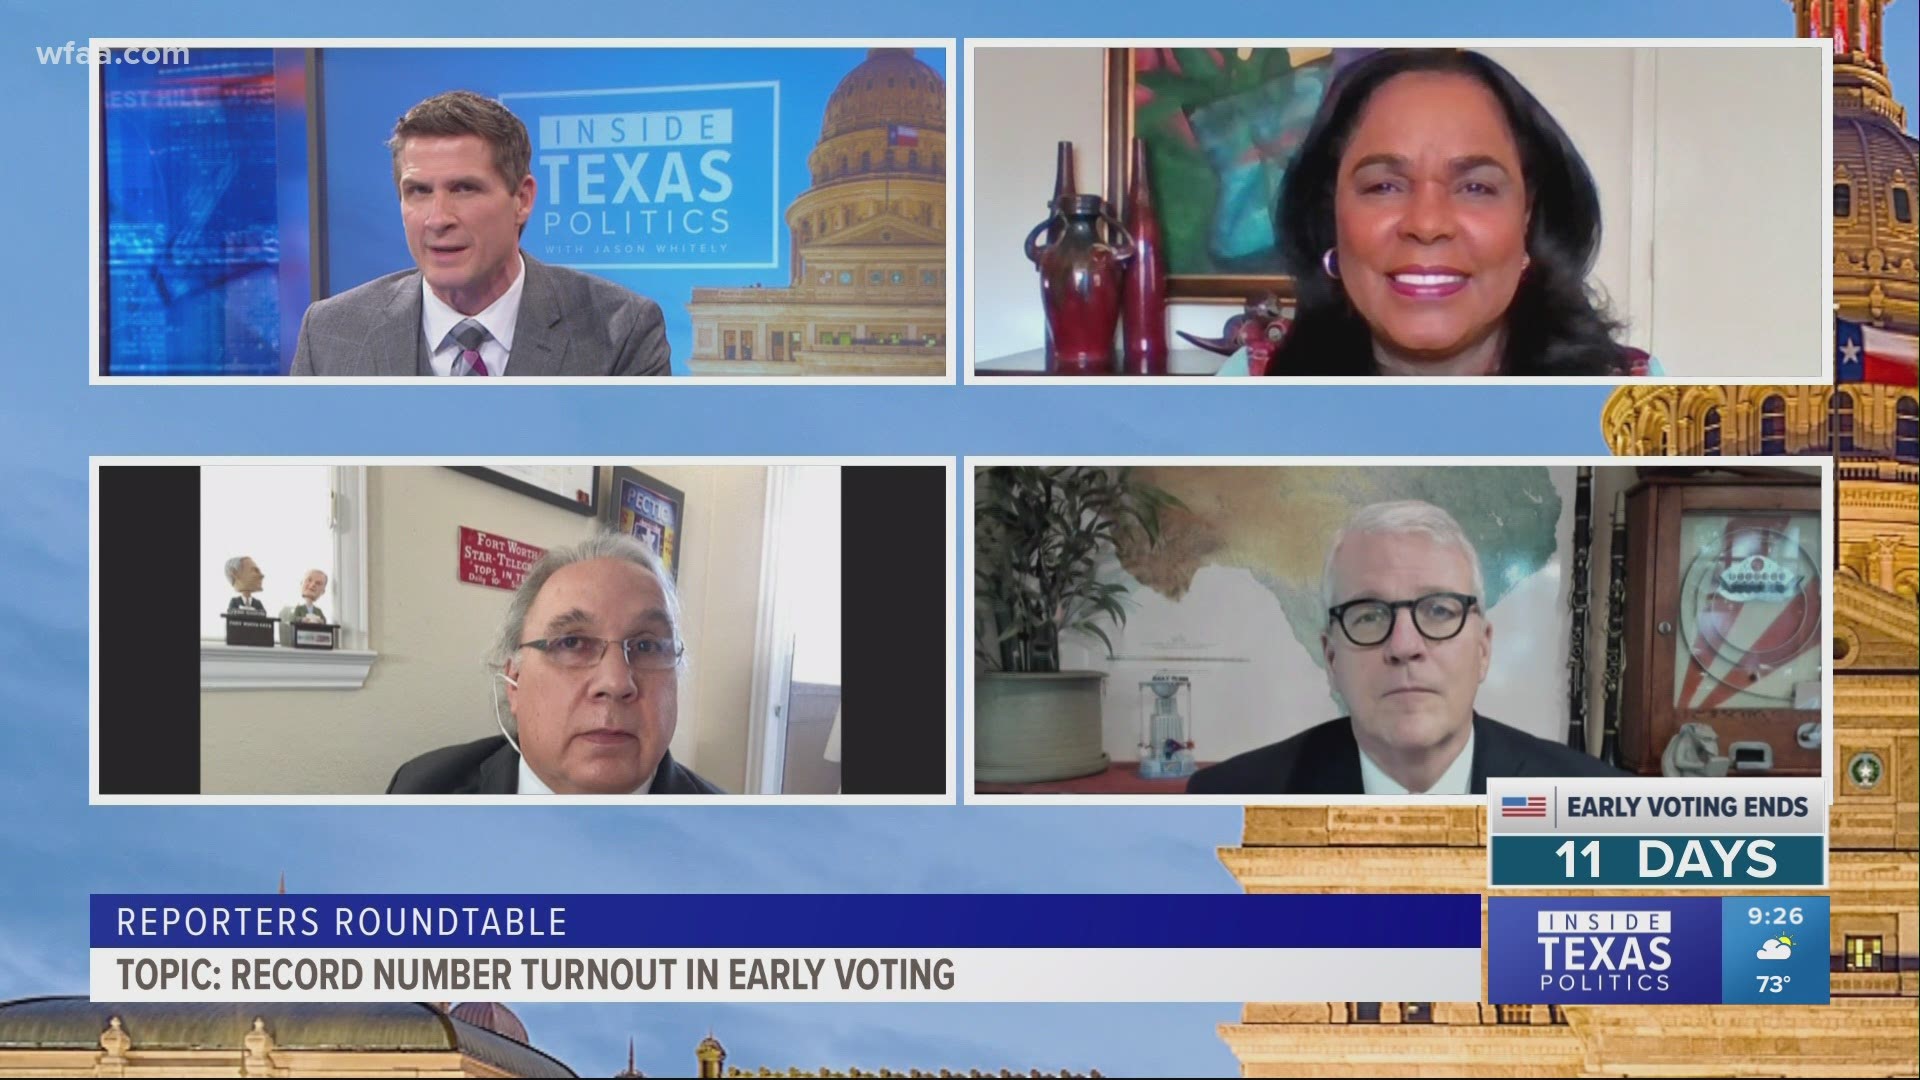 We still have two full weeks to go of early voting— what do we make of these long lines and big numbers? The reporter roundtable takes a look.